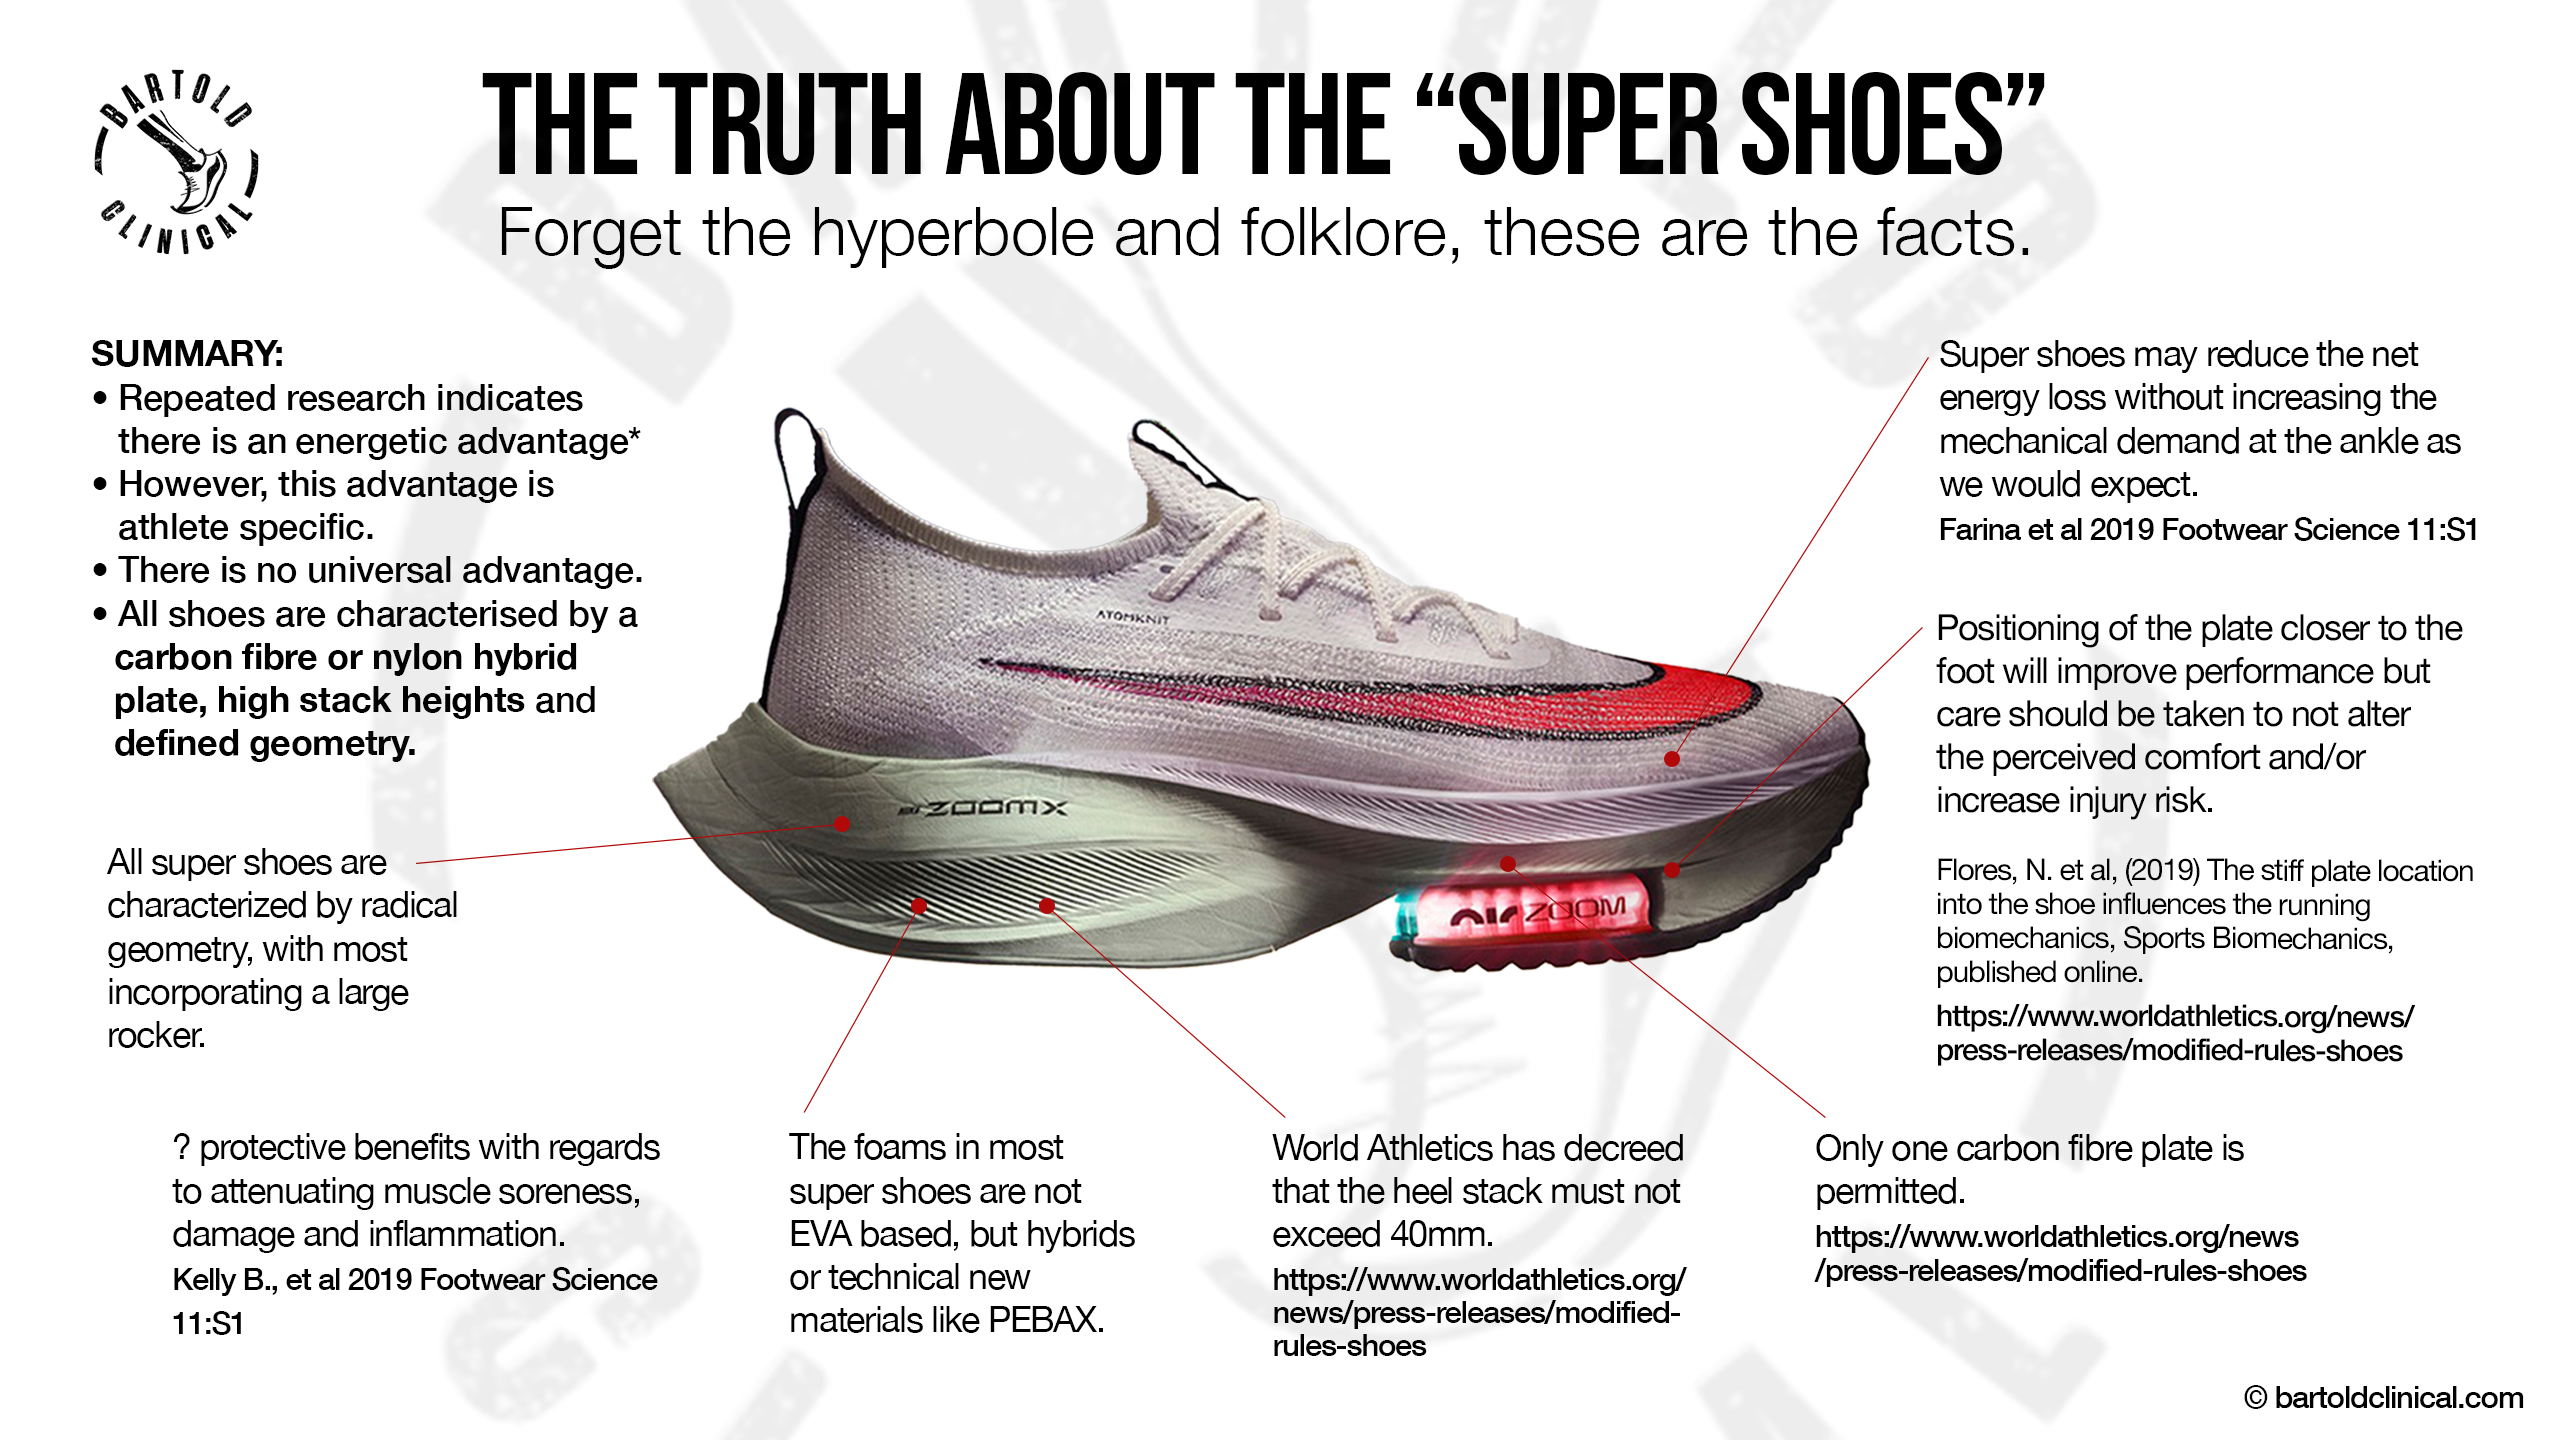 Anatomy of a Running Shoe - with Infographic